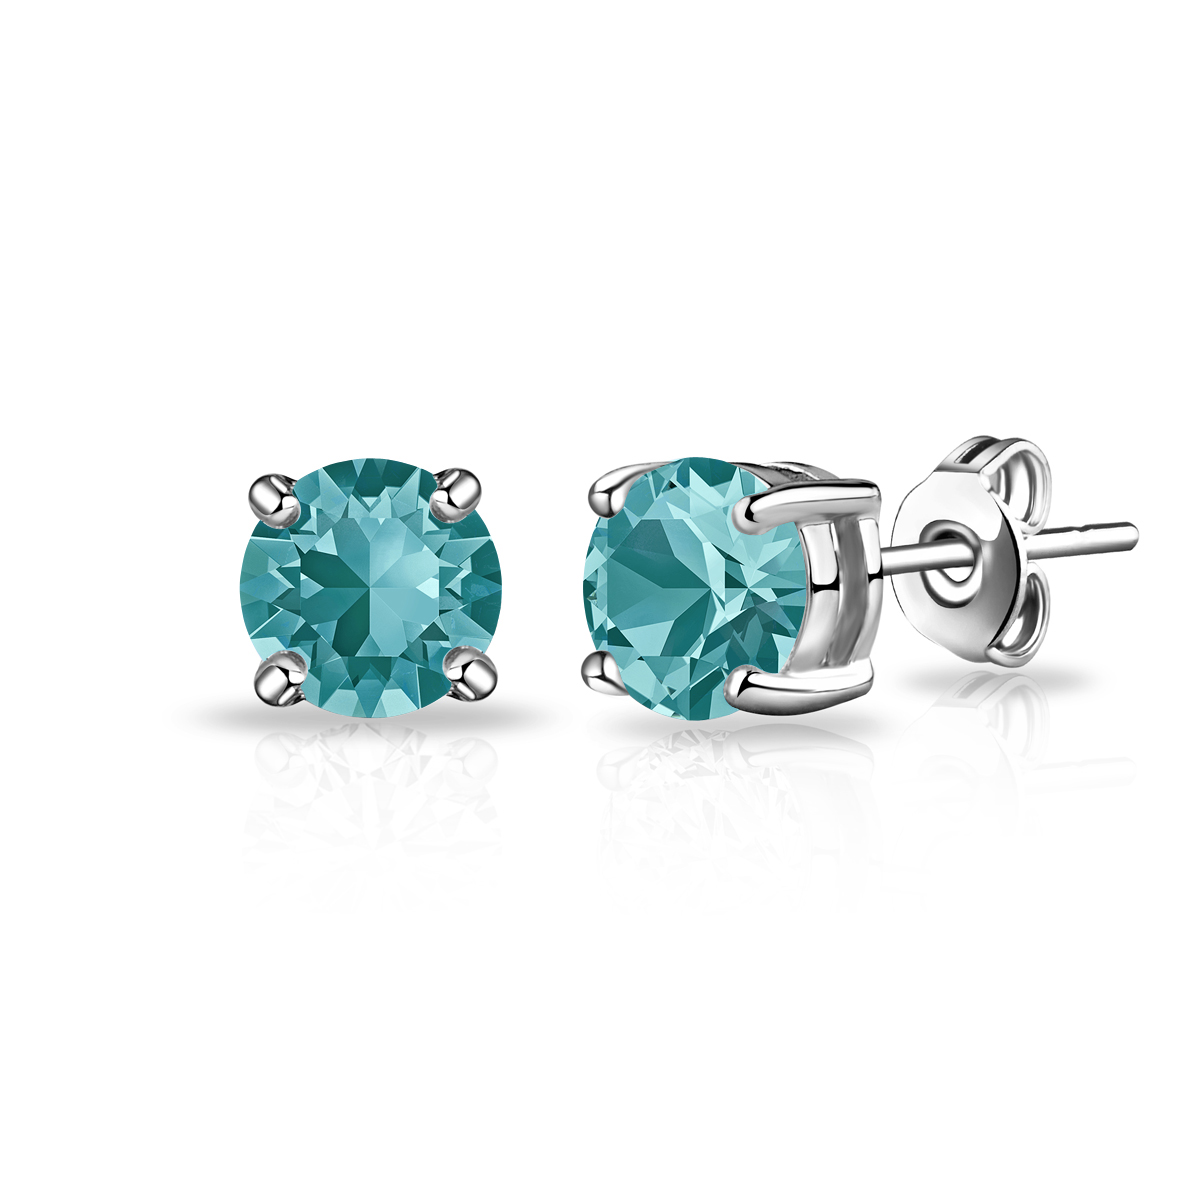 Blue Stud Earrings Created with Zircondia® Crystals